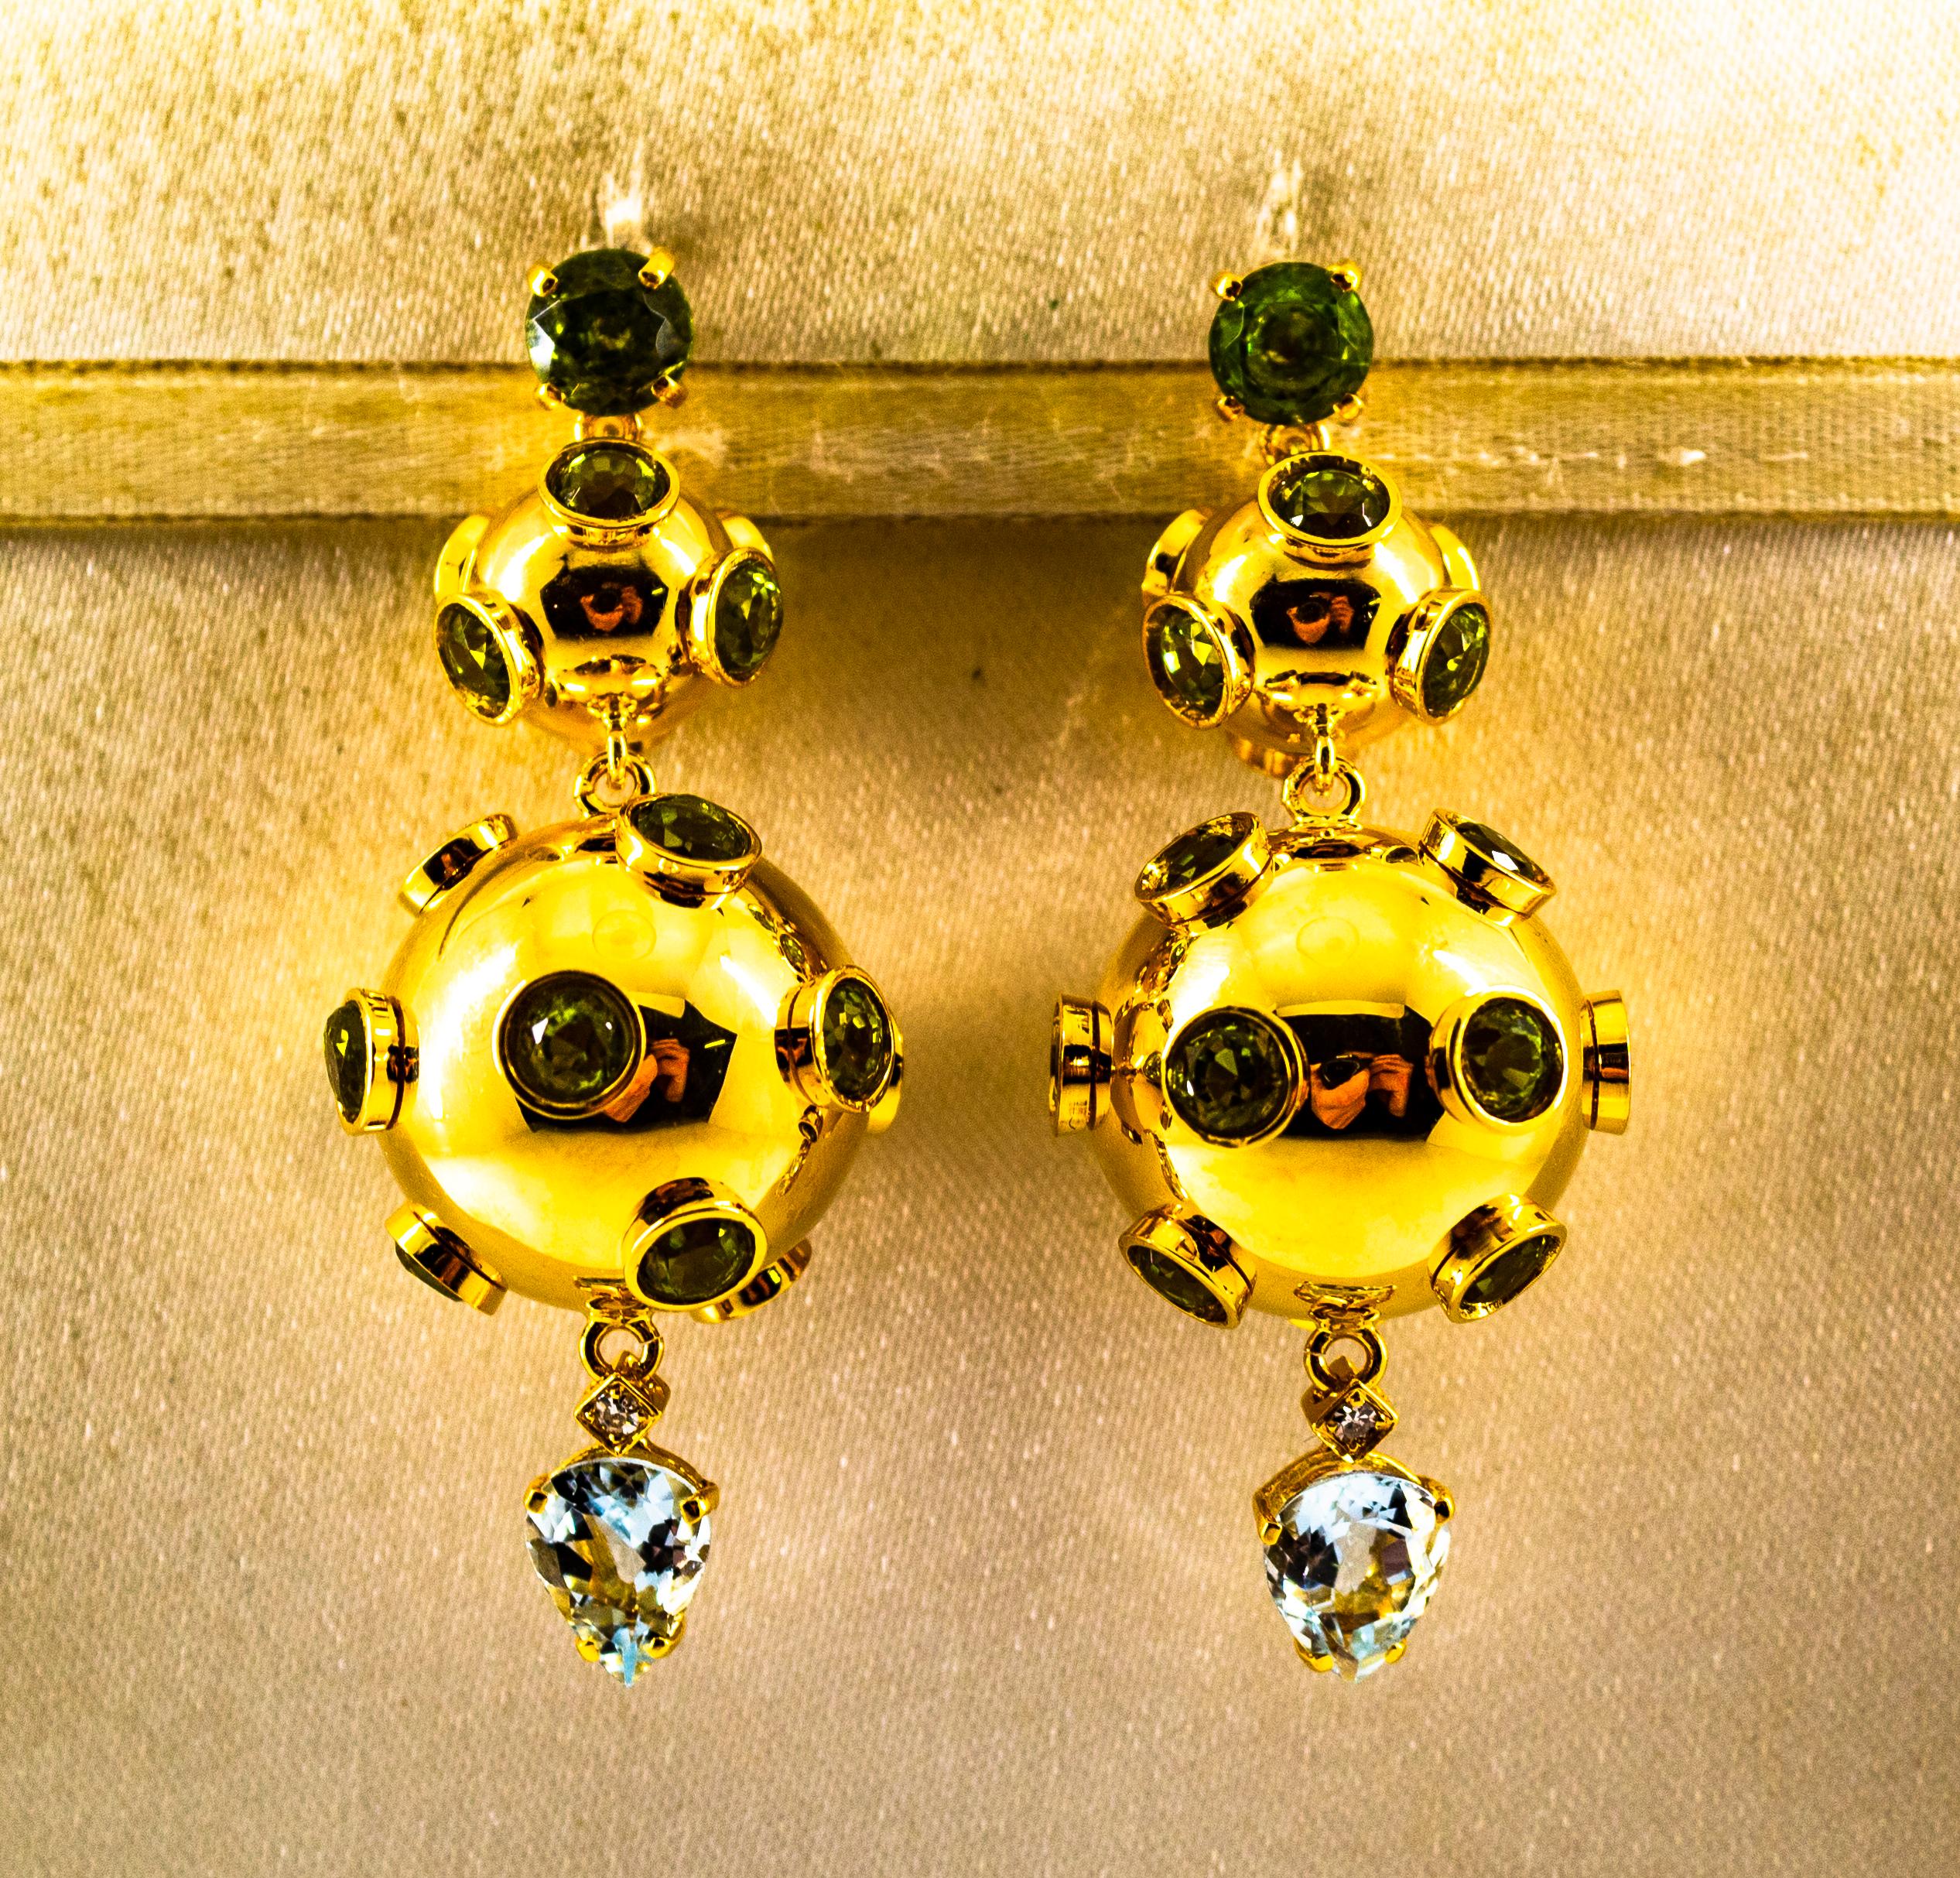 These Earrings are made of 9K Yellow Gold.
These Earrings have 0.05 Carats of White Brilliant Cut Diamonds.
These Earrings have 2.80 Carats of Aquamarines.
These Earrings have 14.80 Carats of Peridots.

These Earrings are inspired by Art